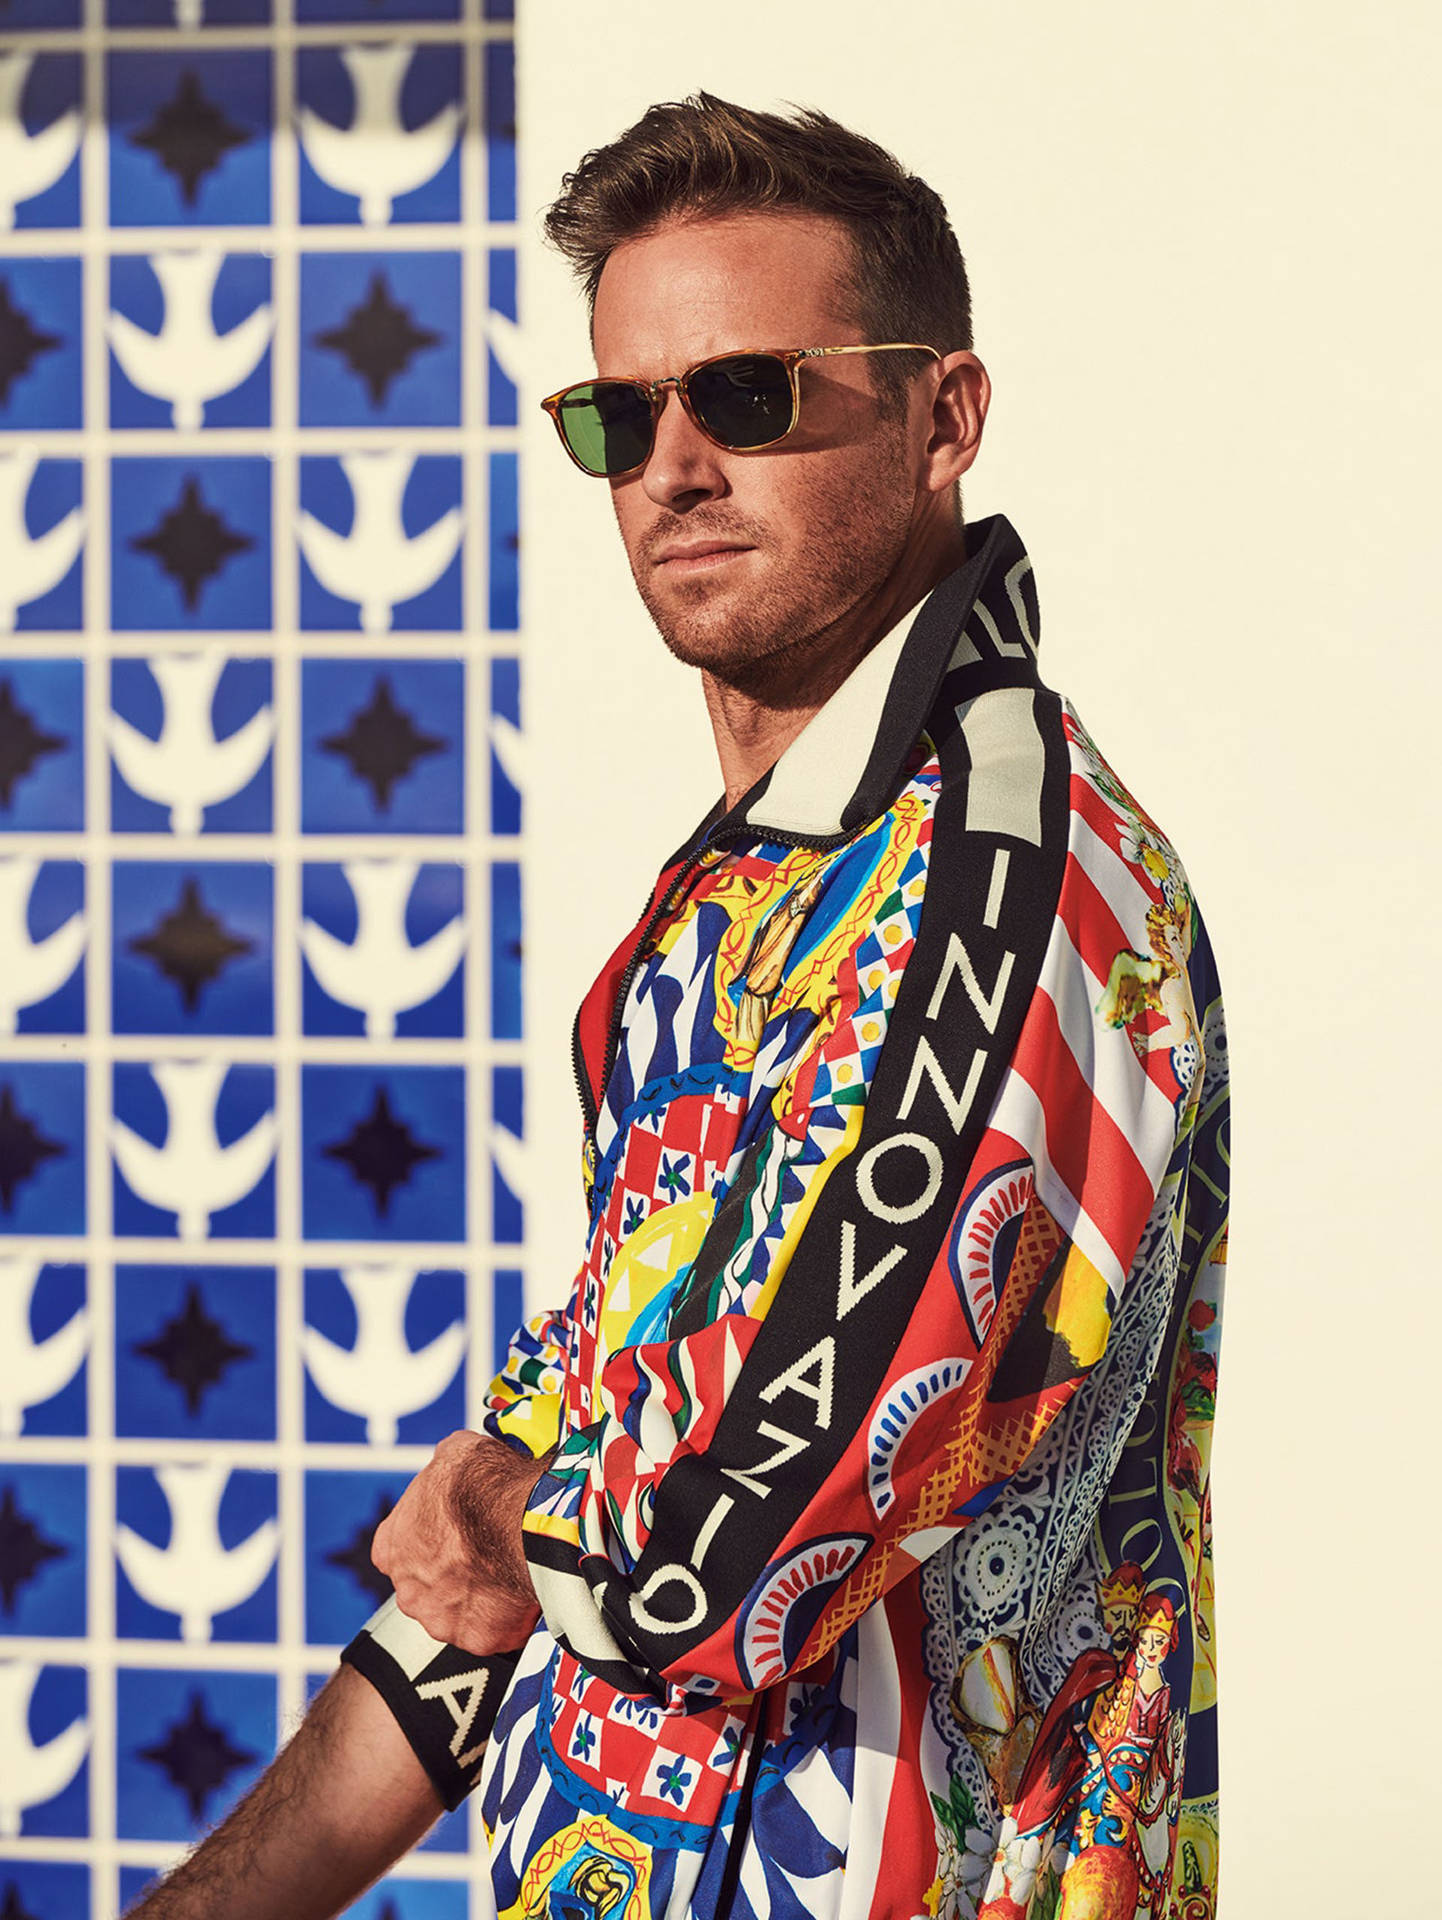 Armie Hammer Gq Colorful Jacket